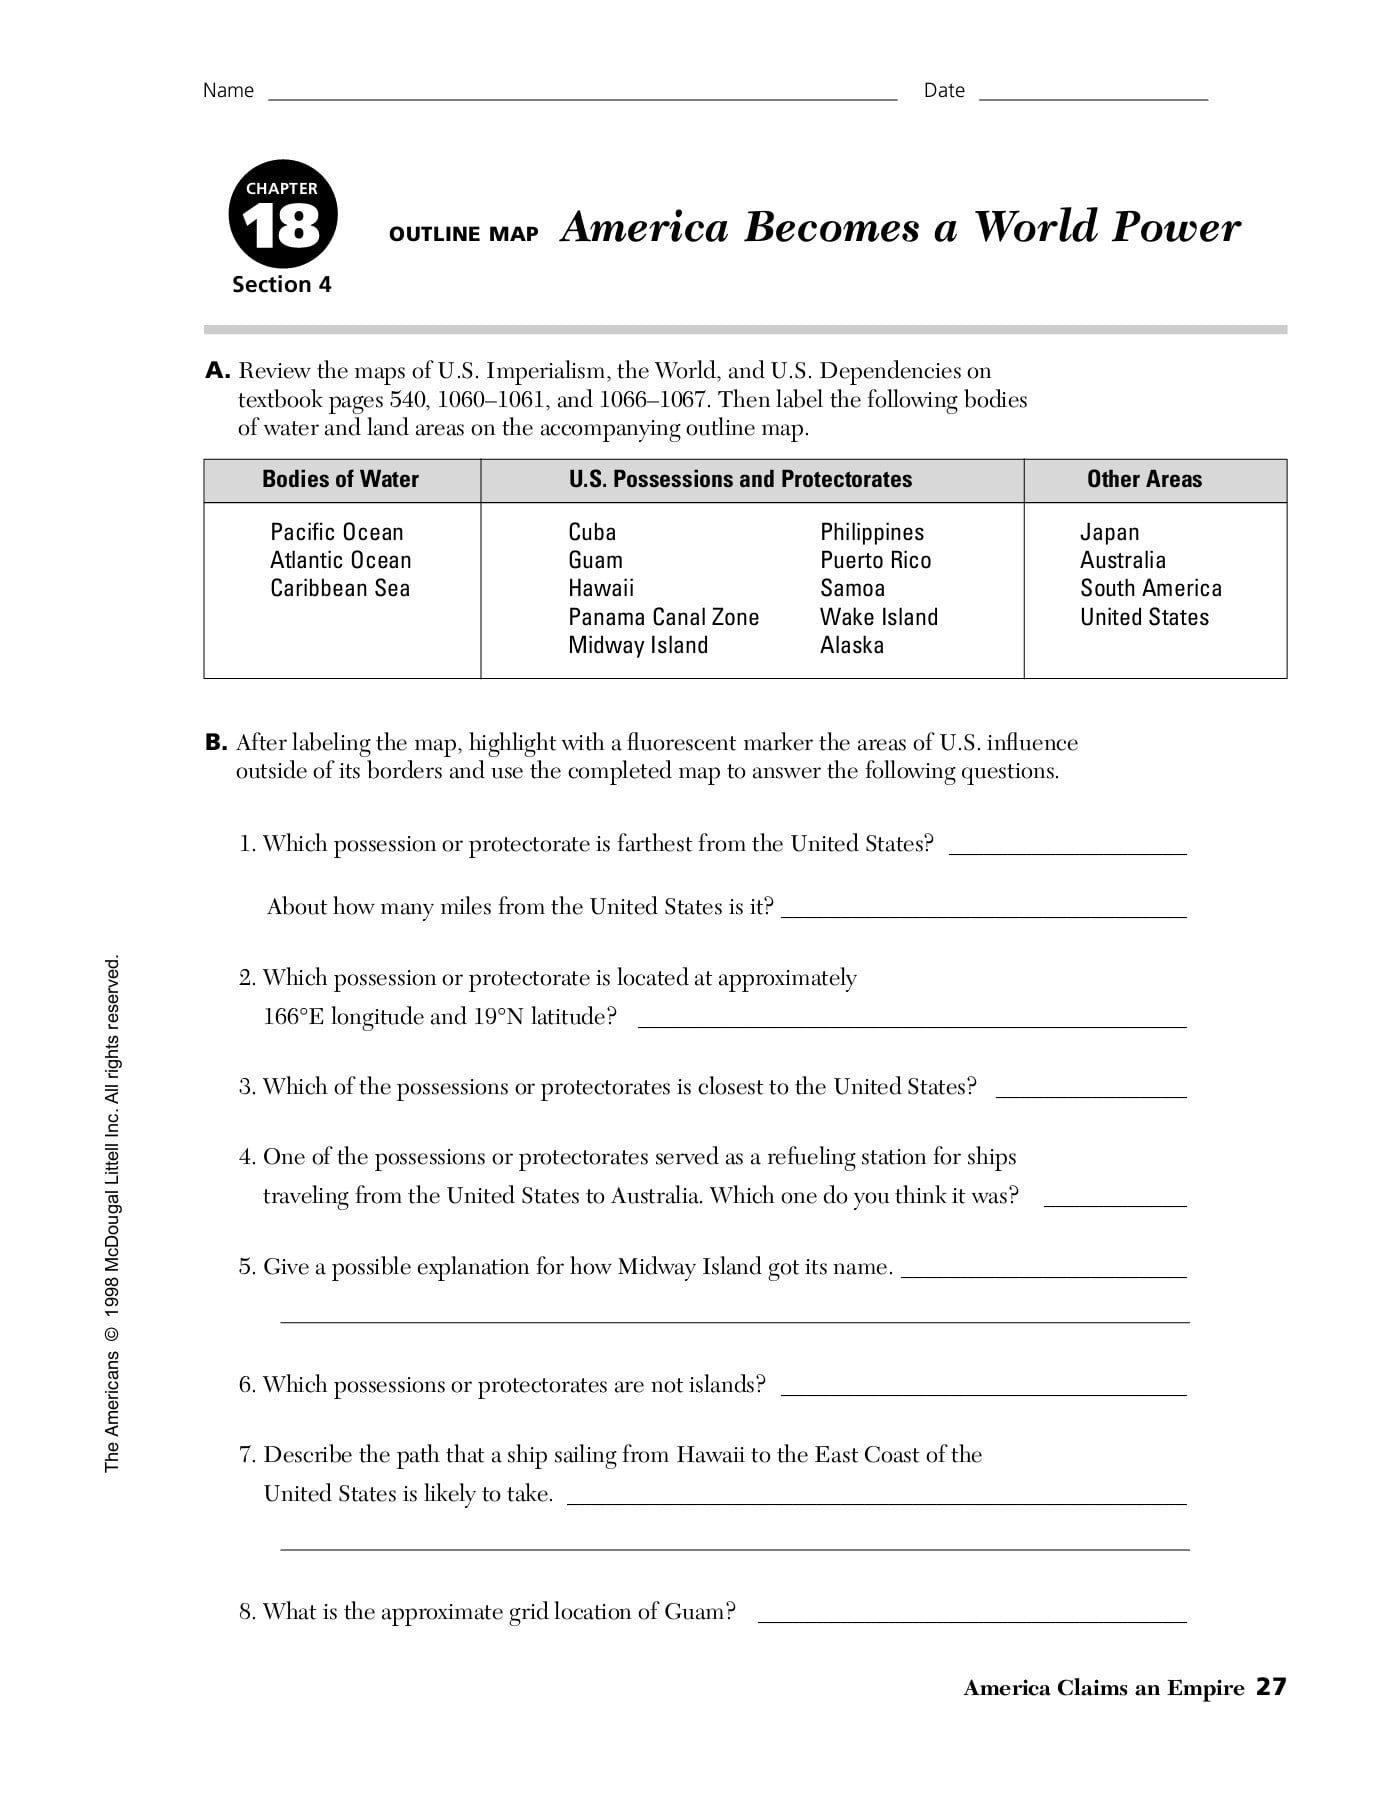 America Becomes A World Power SchoolFusion Pages 1 3 Flip PDF Download FlipHTML5